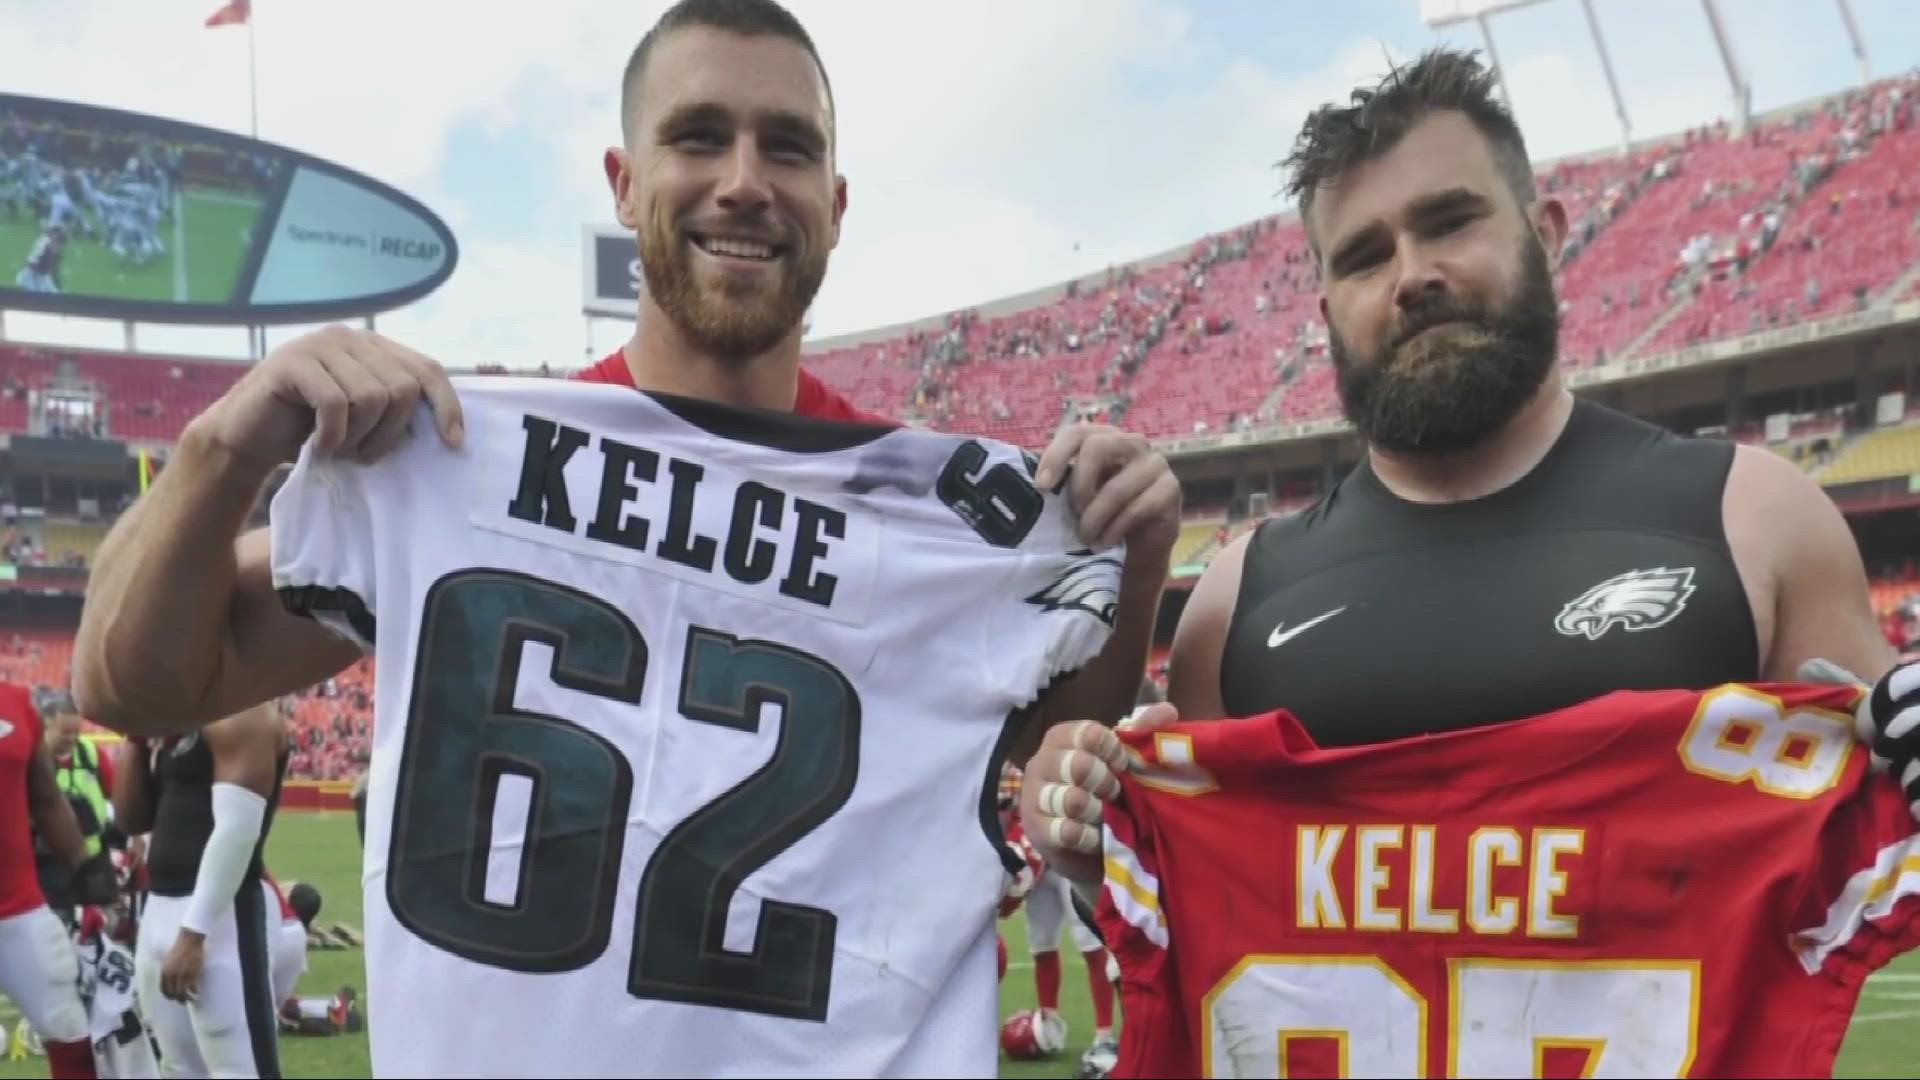 This is so cool! Travis and Jason Kelce, who were raised in Cleveland Heights, are both going to the Super Bowl on opposing teams.